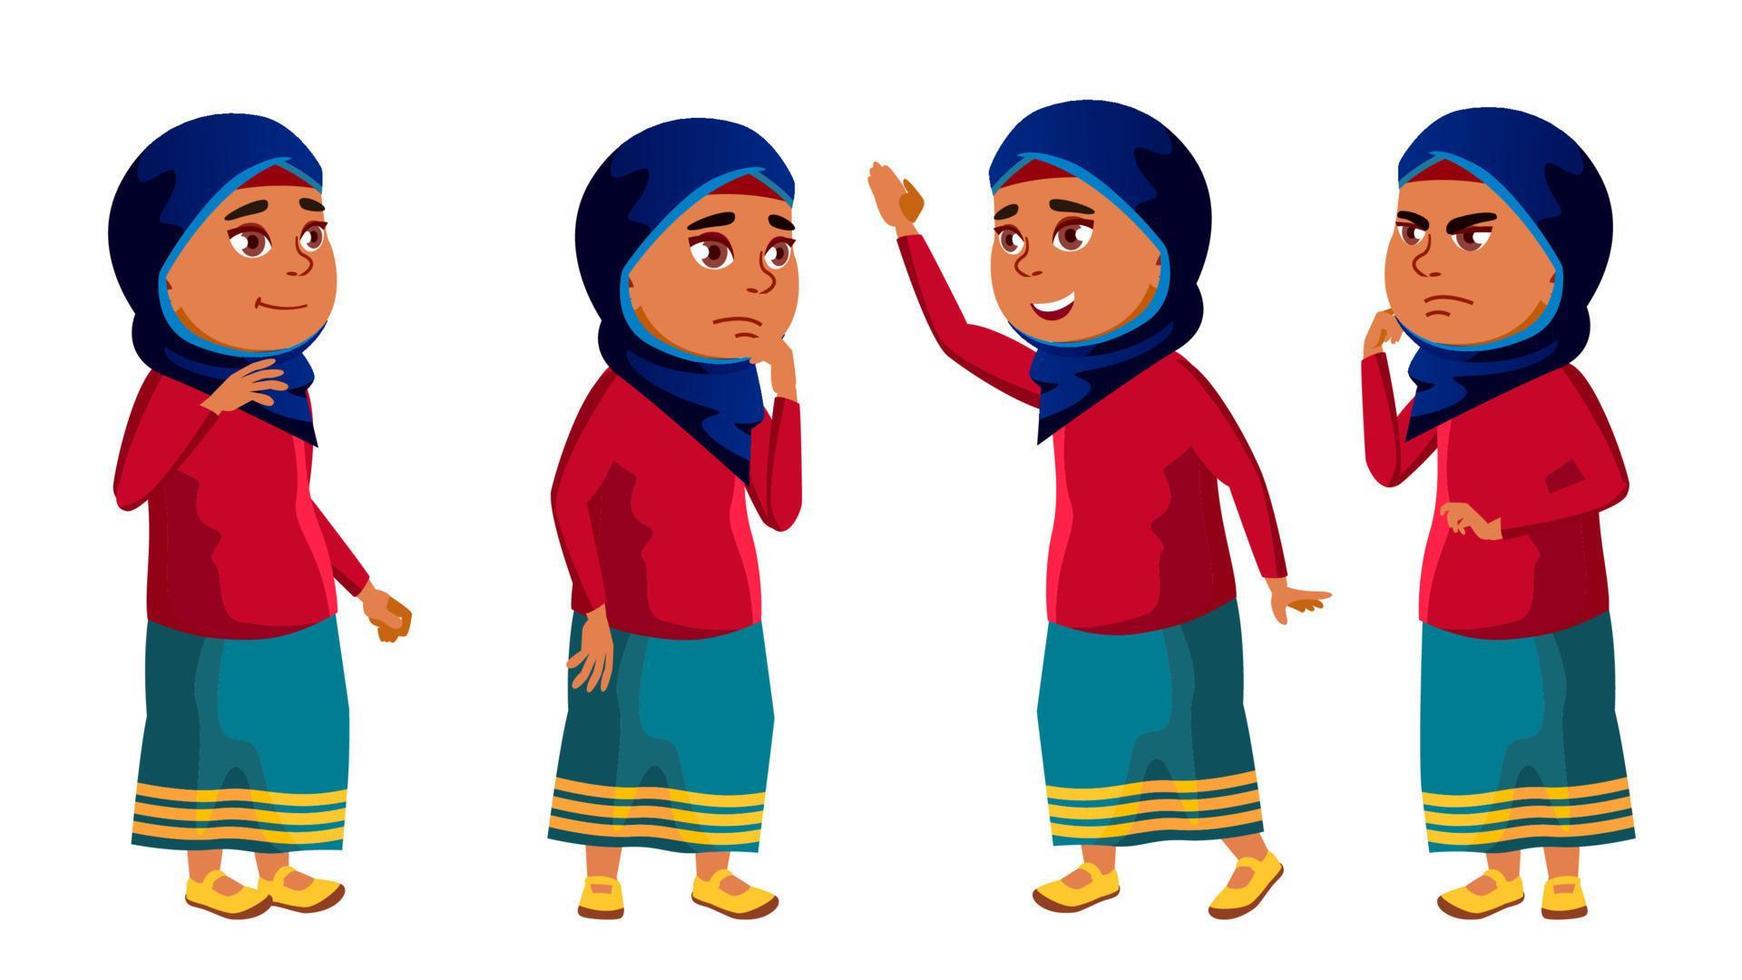 Arab, Muslim Girl Kid Poses Set Vector. High School Child. Education. Young, Cute, Comic. For Card, Advertisement, Greeting Design. Isolated Cartoon Illustration vector